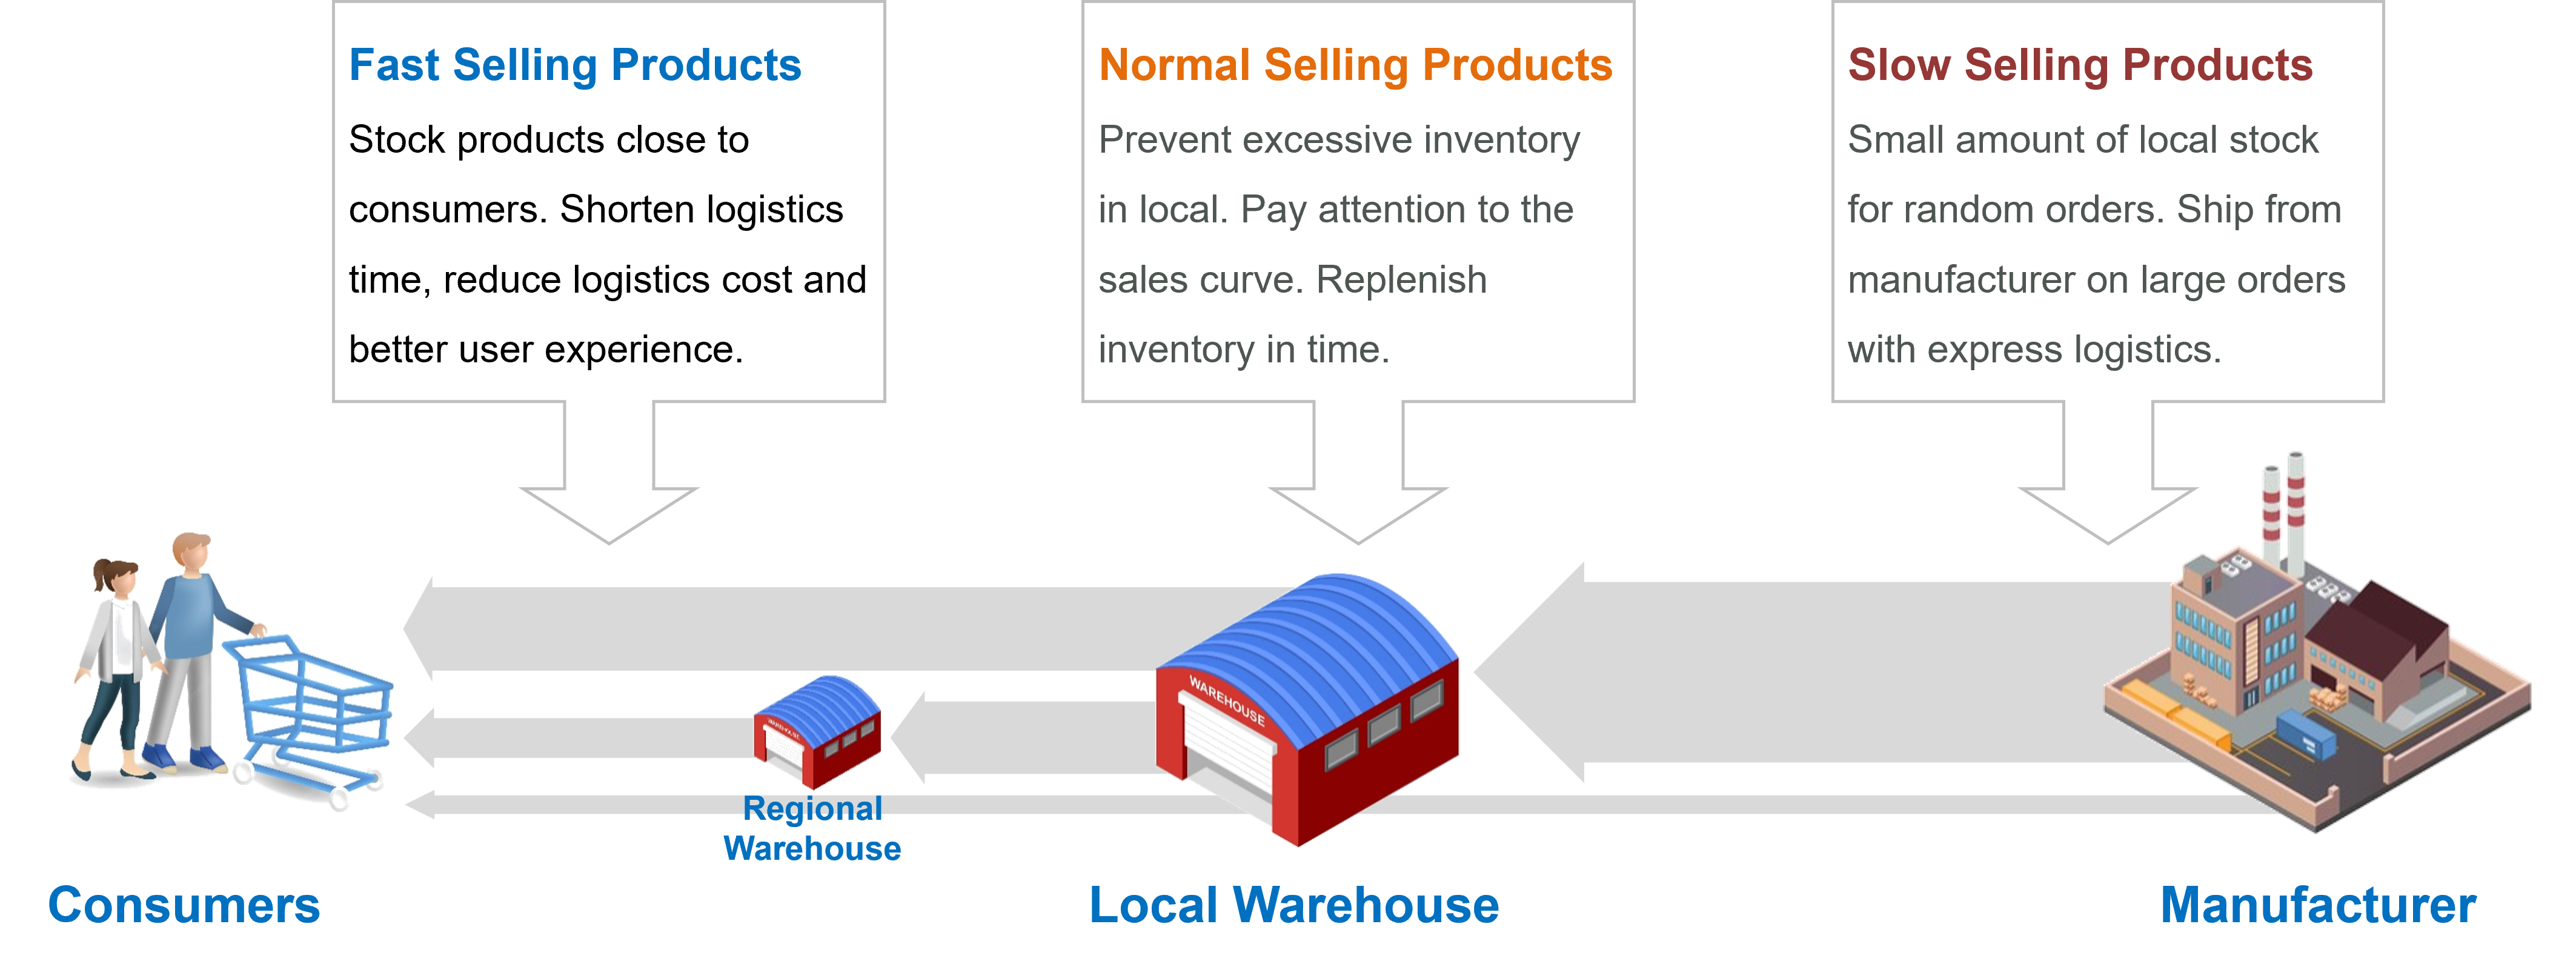 Online Sales Product Stocking Strategy